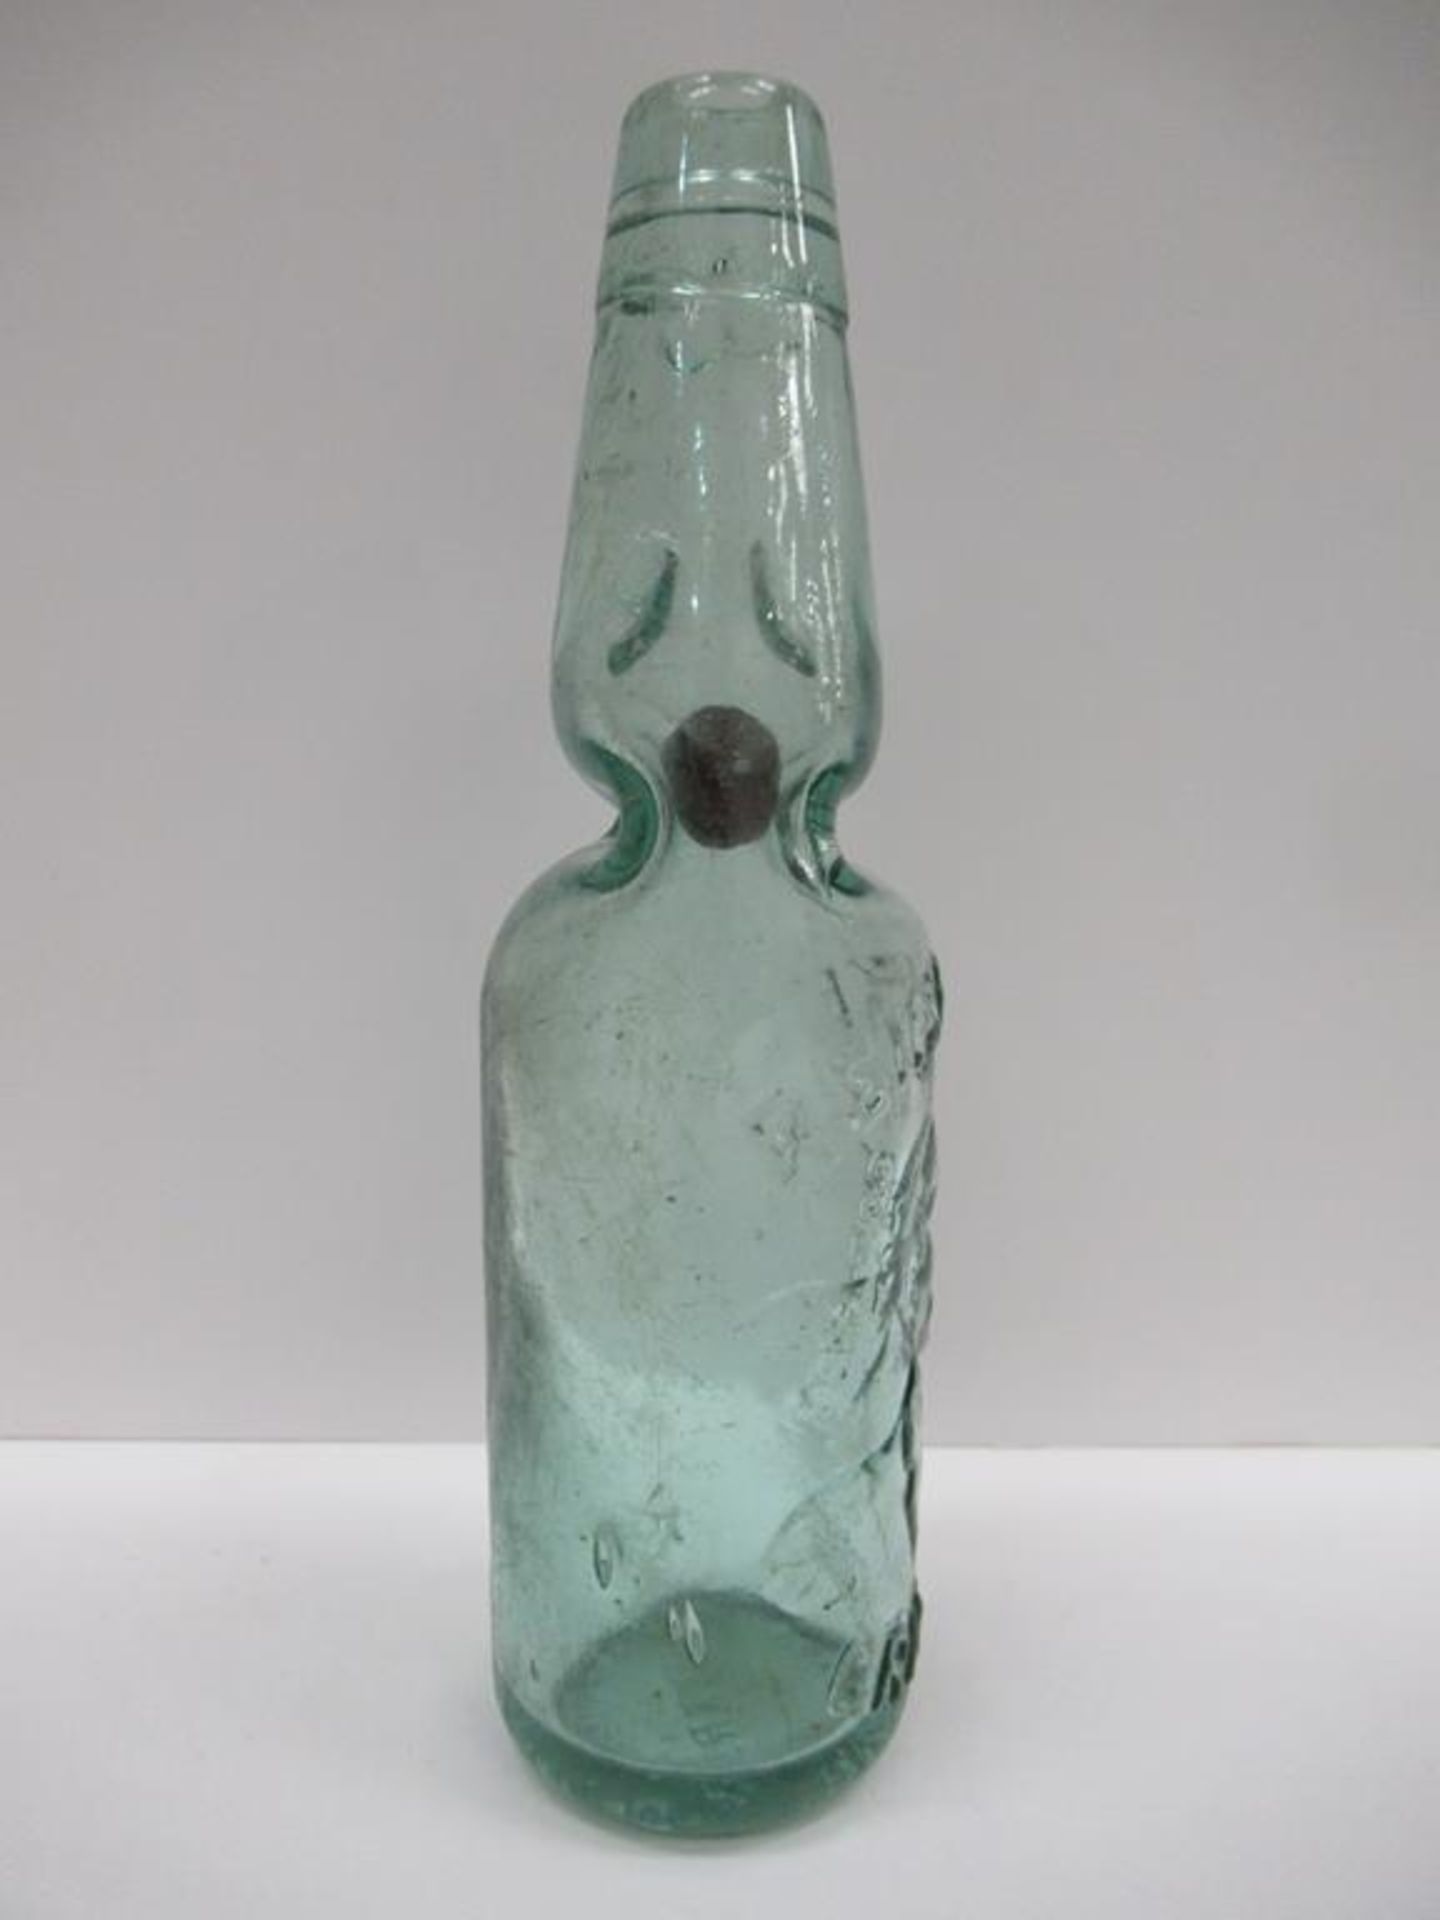 Grimsby Reinecke's Aerated Waters codd bottle with coloured marble 10oz - Image 2 of 9